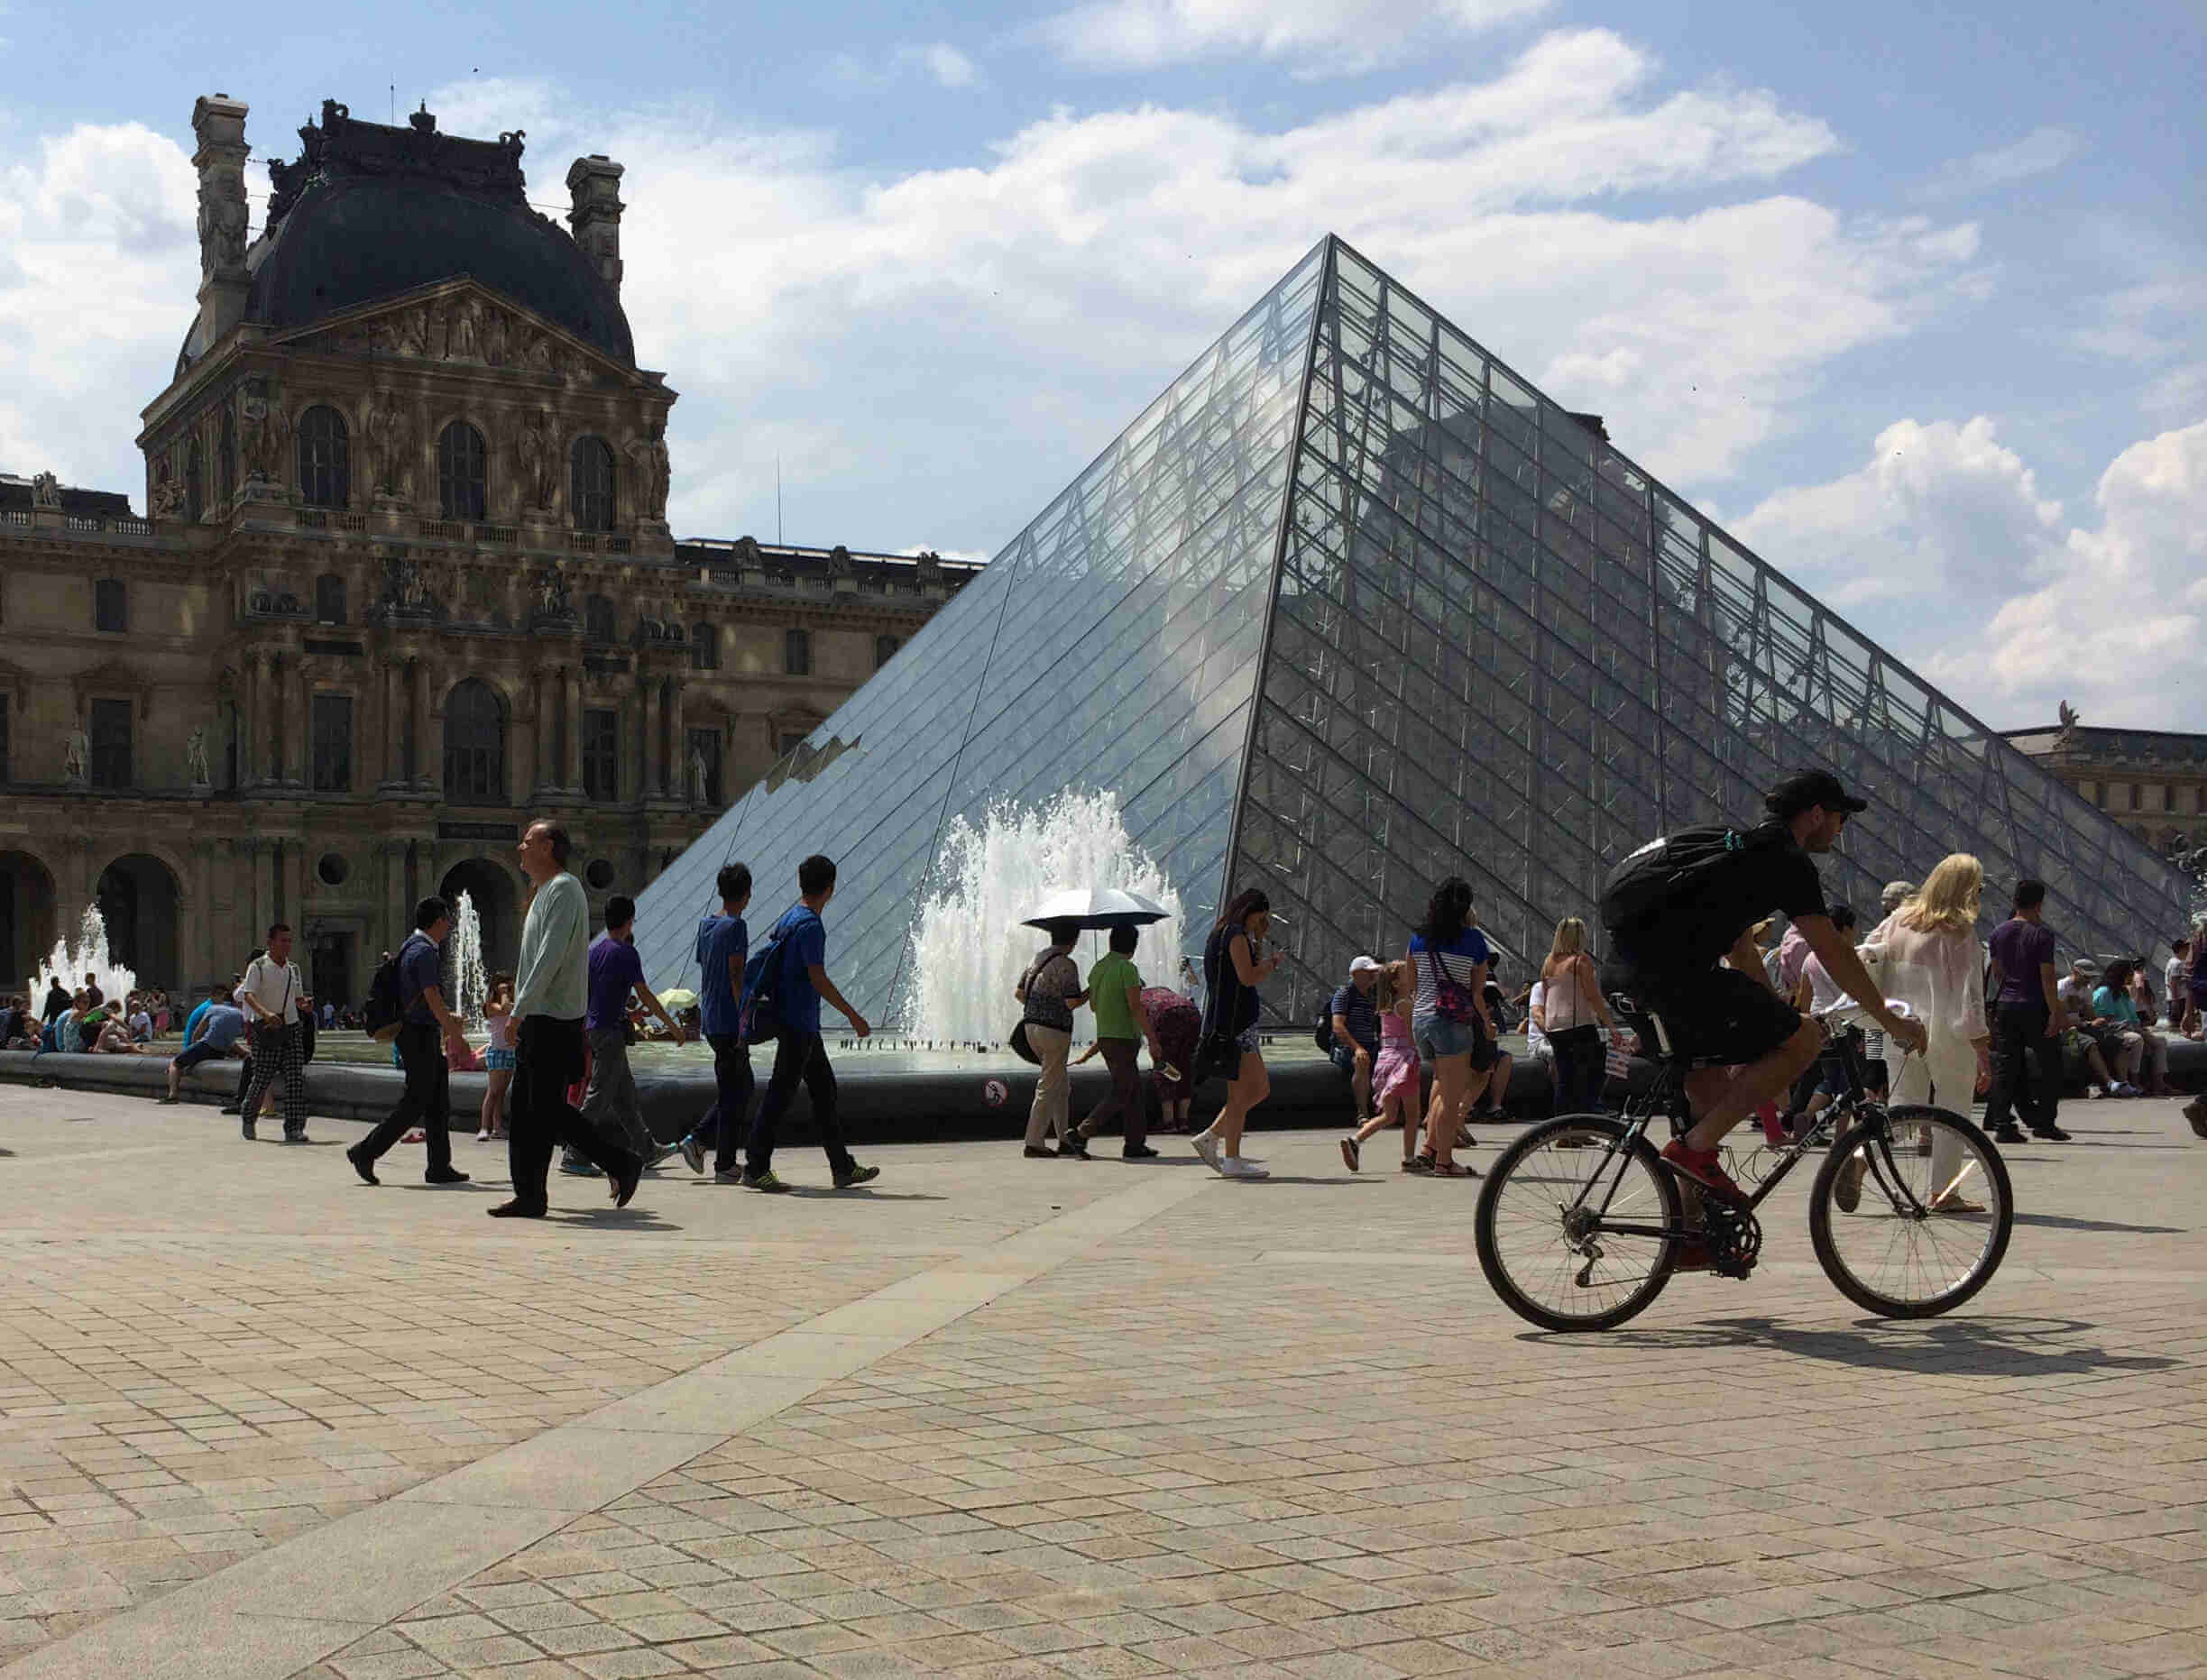 Right side view of a cyclist wearing a backpack, riding a Surly bike across the courtyard in front of the Louvre museum